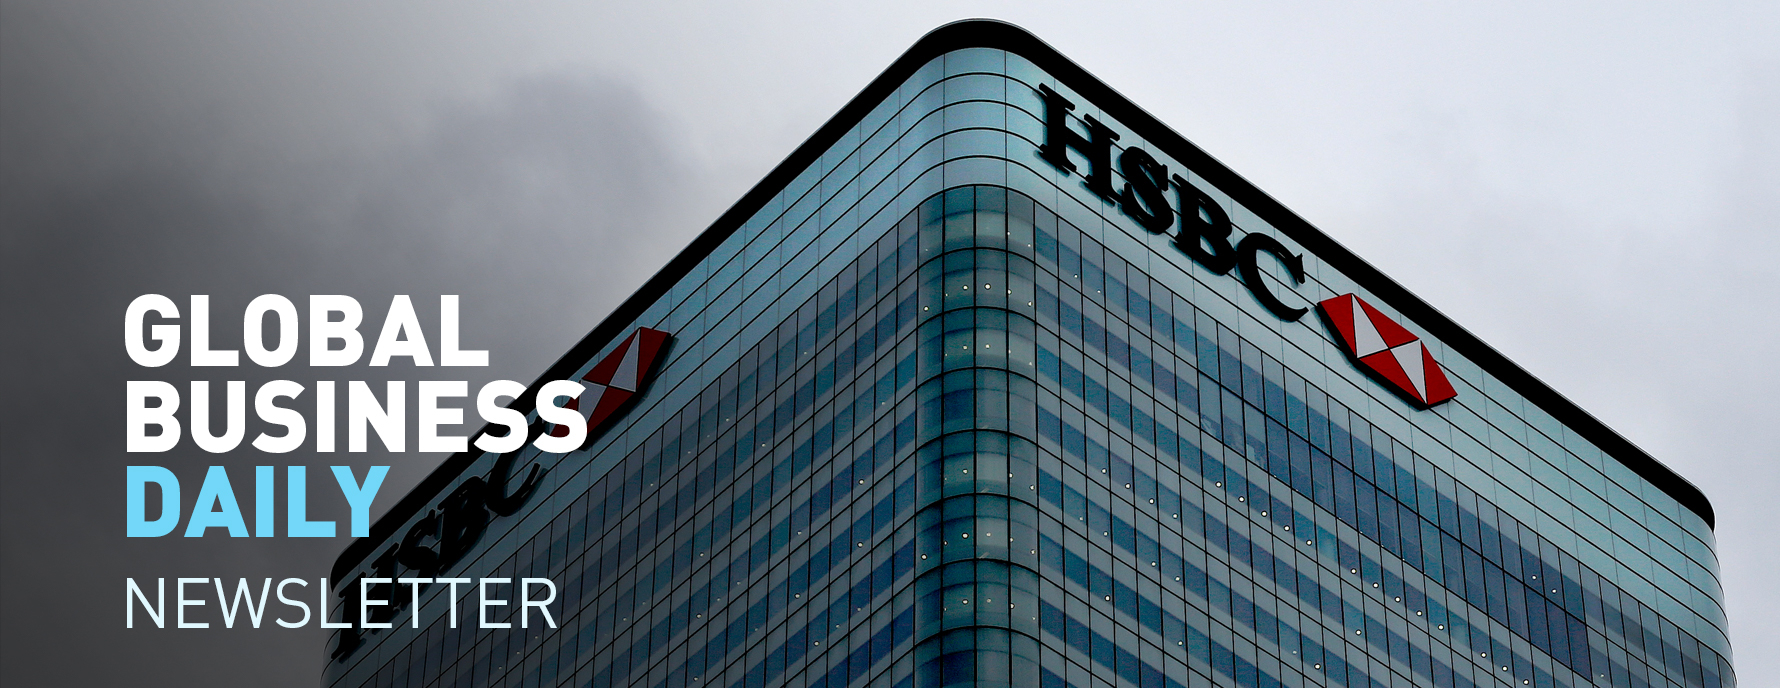 Global Business Daily Hsbc Losses Oil Casualties Lufthansa